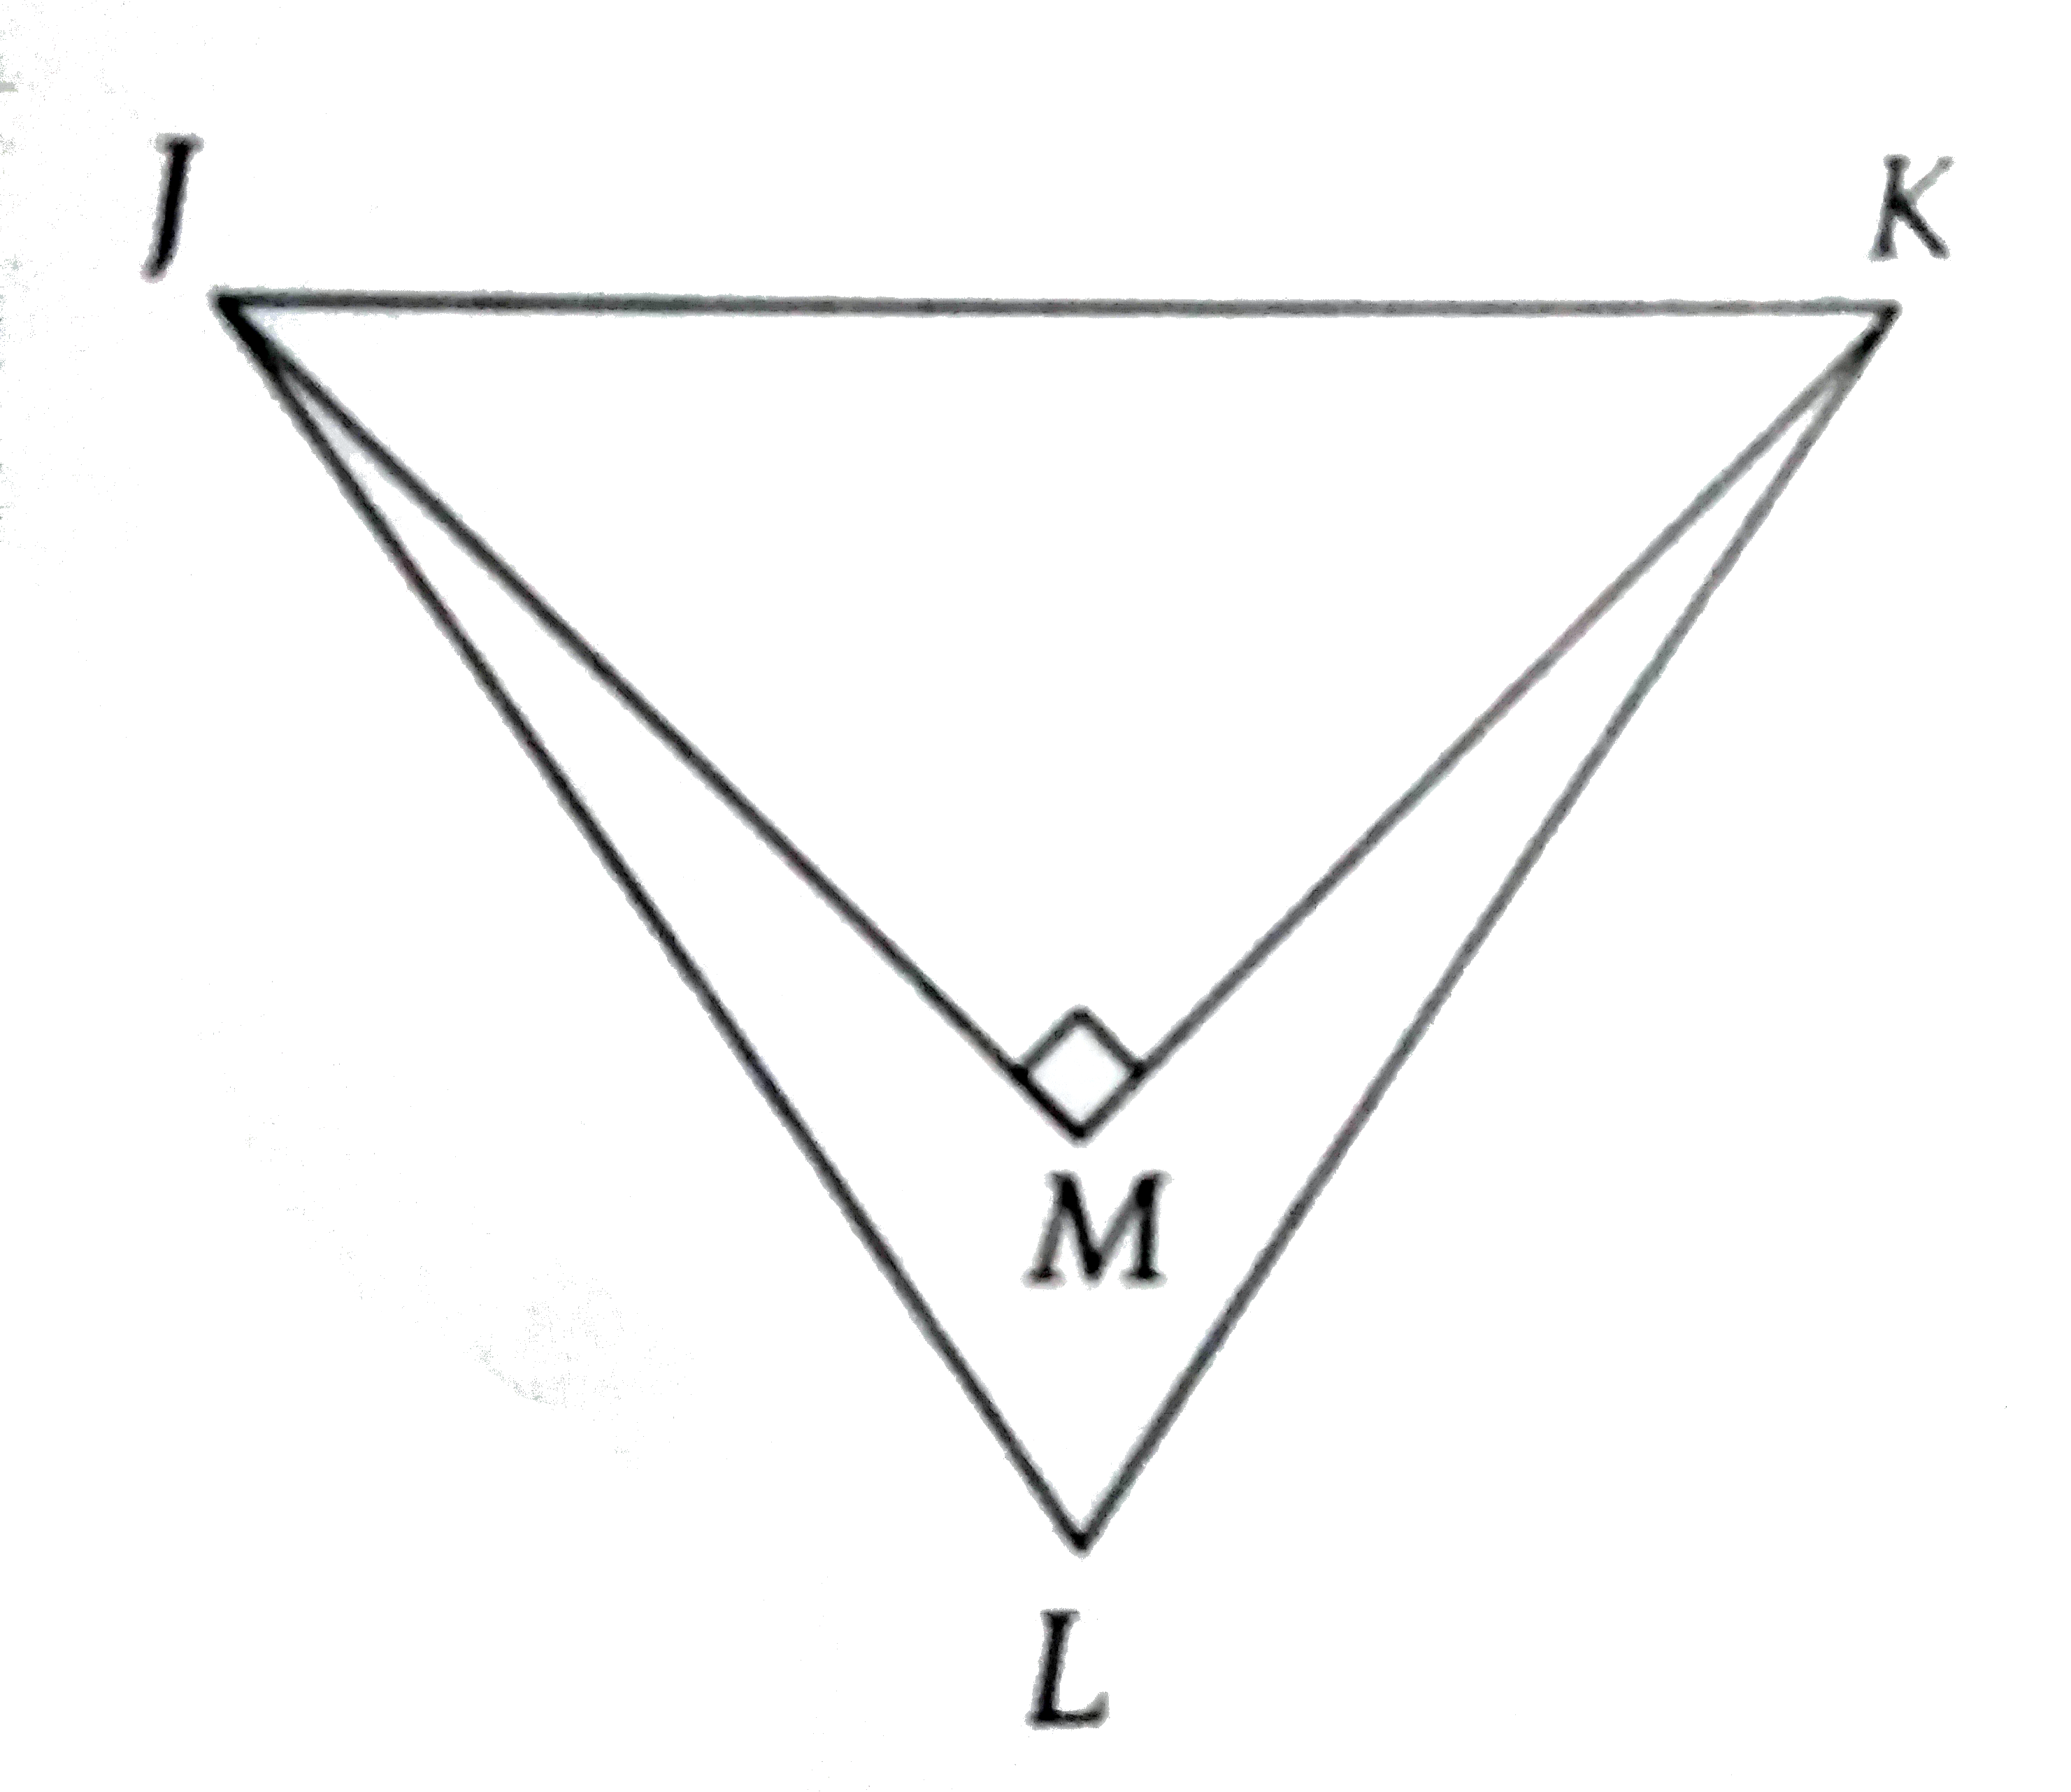 Delta JKL is equilateral, and Delta JKM is isosceles. If bar(KL)=2, what is the distance from L to M  ?